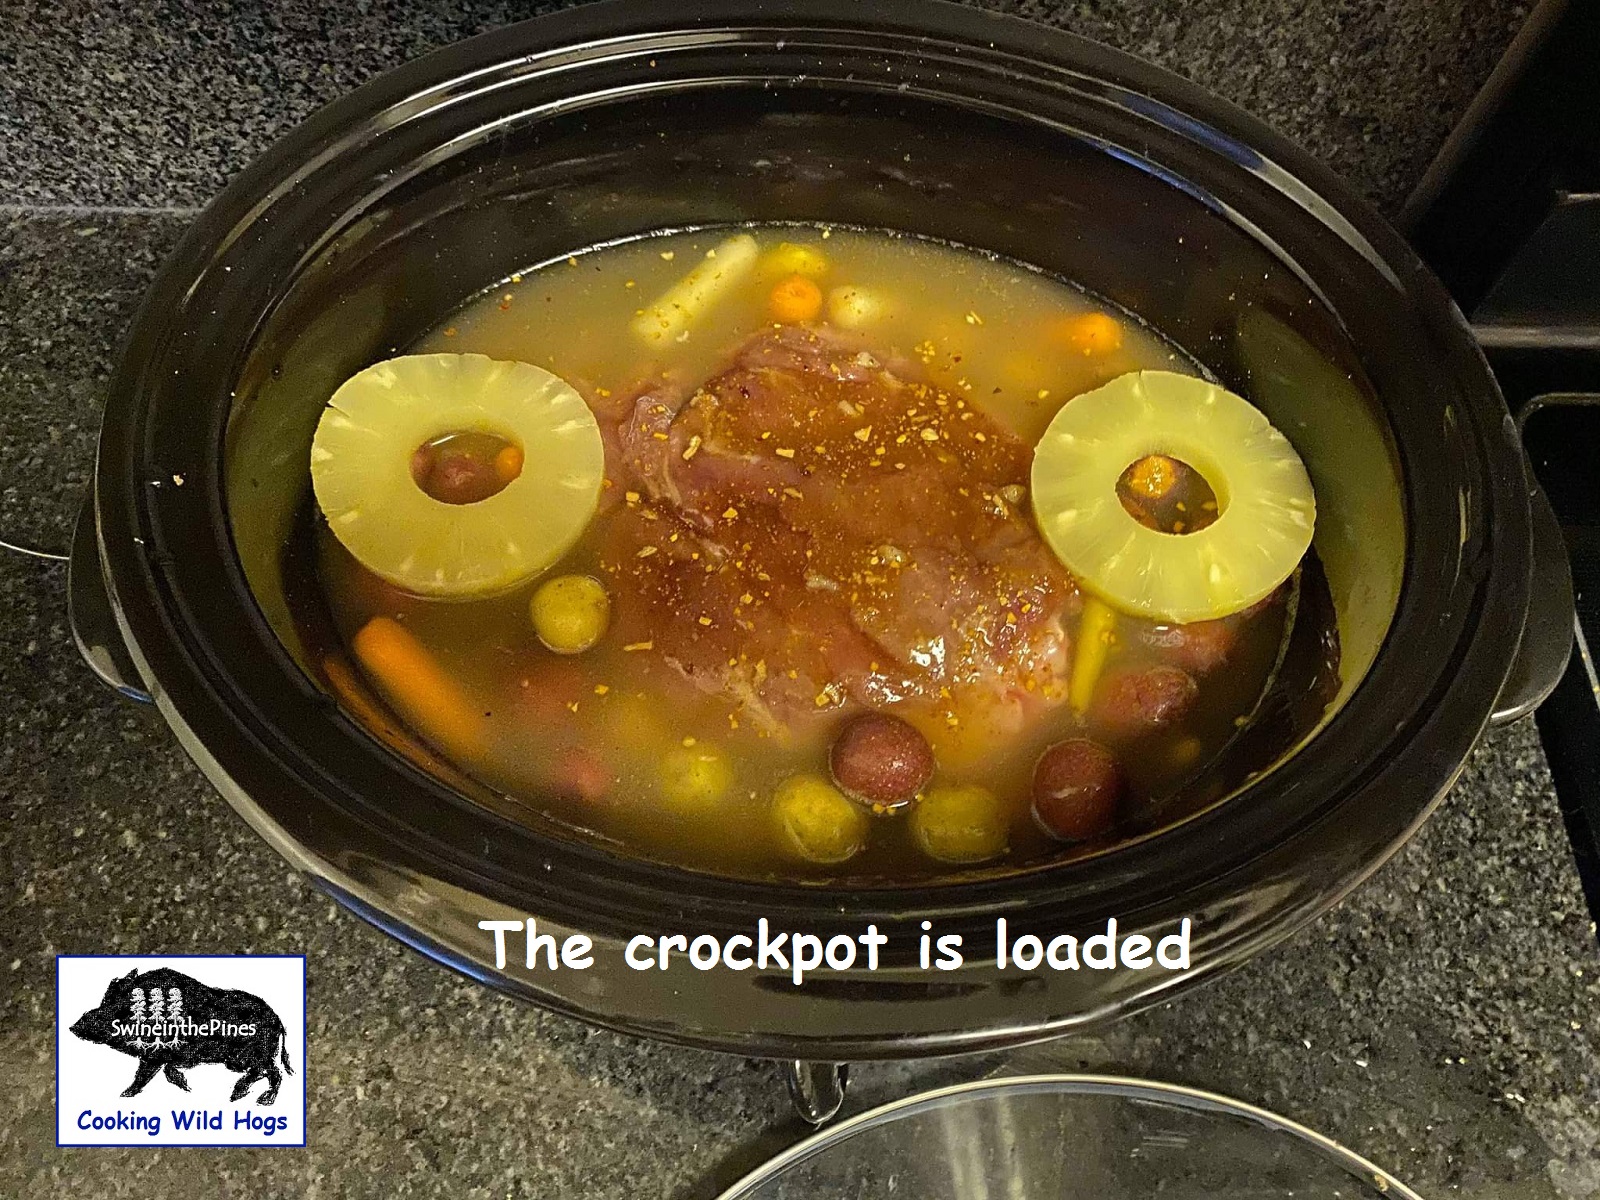 The crockpot is loaded with the all fixings